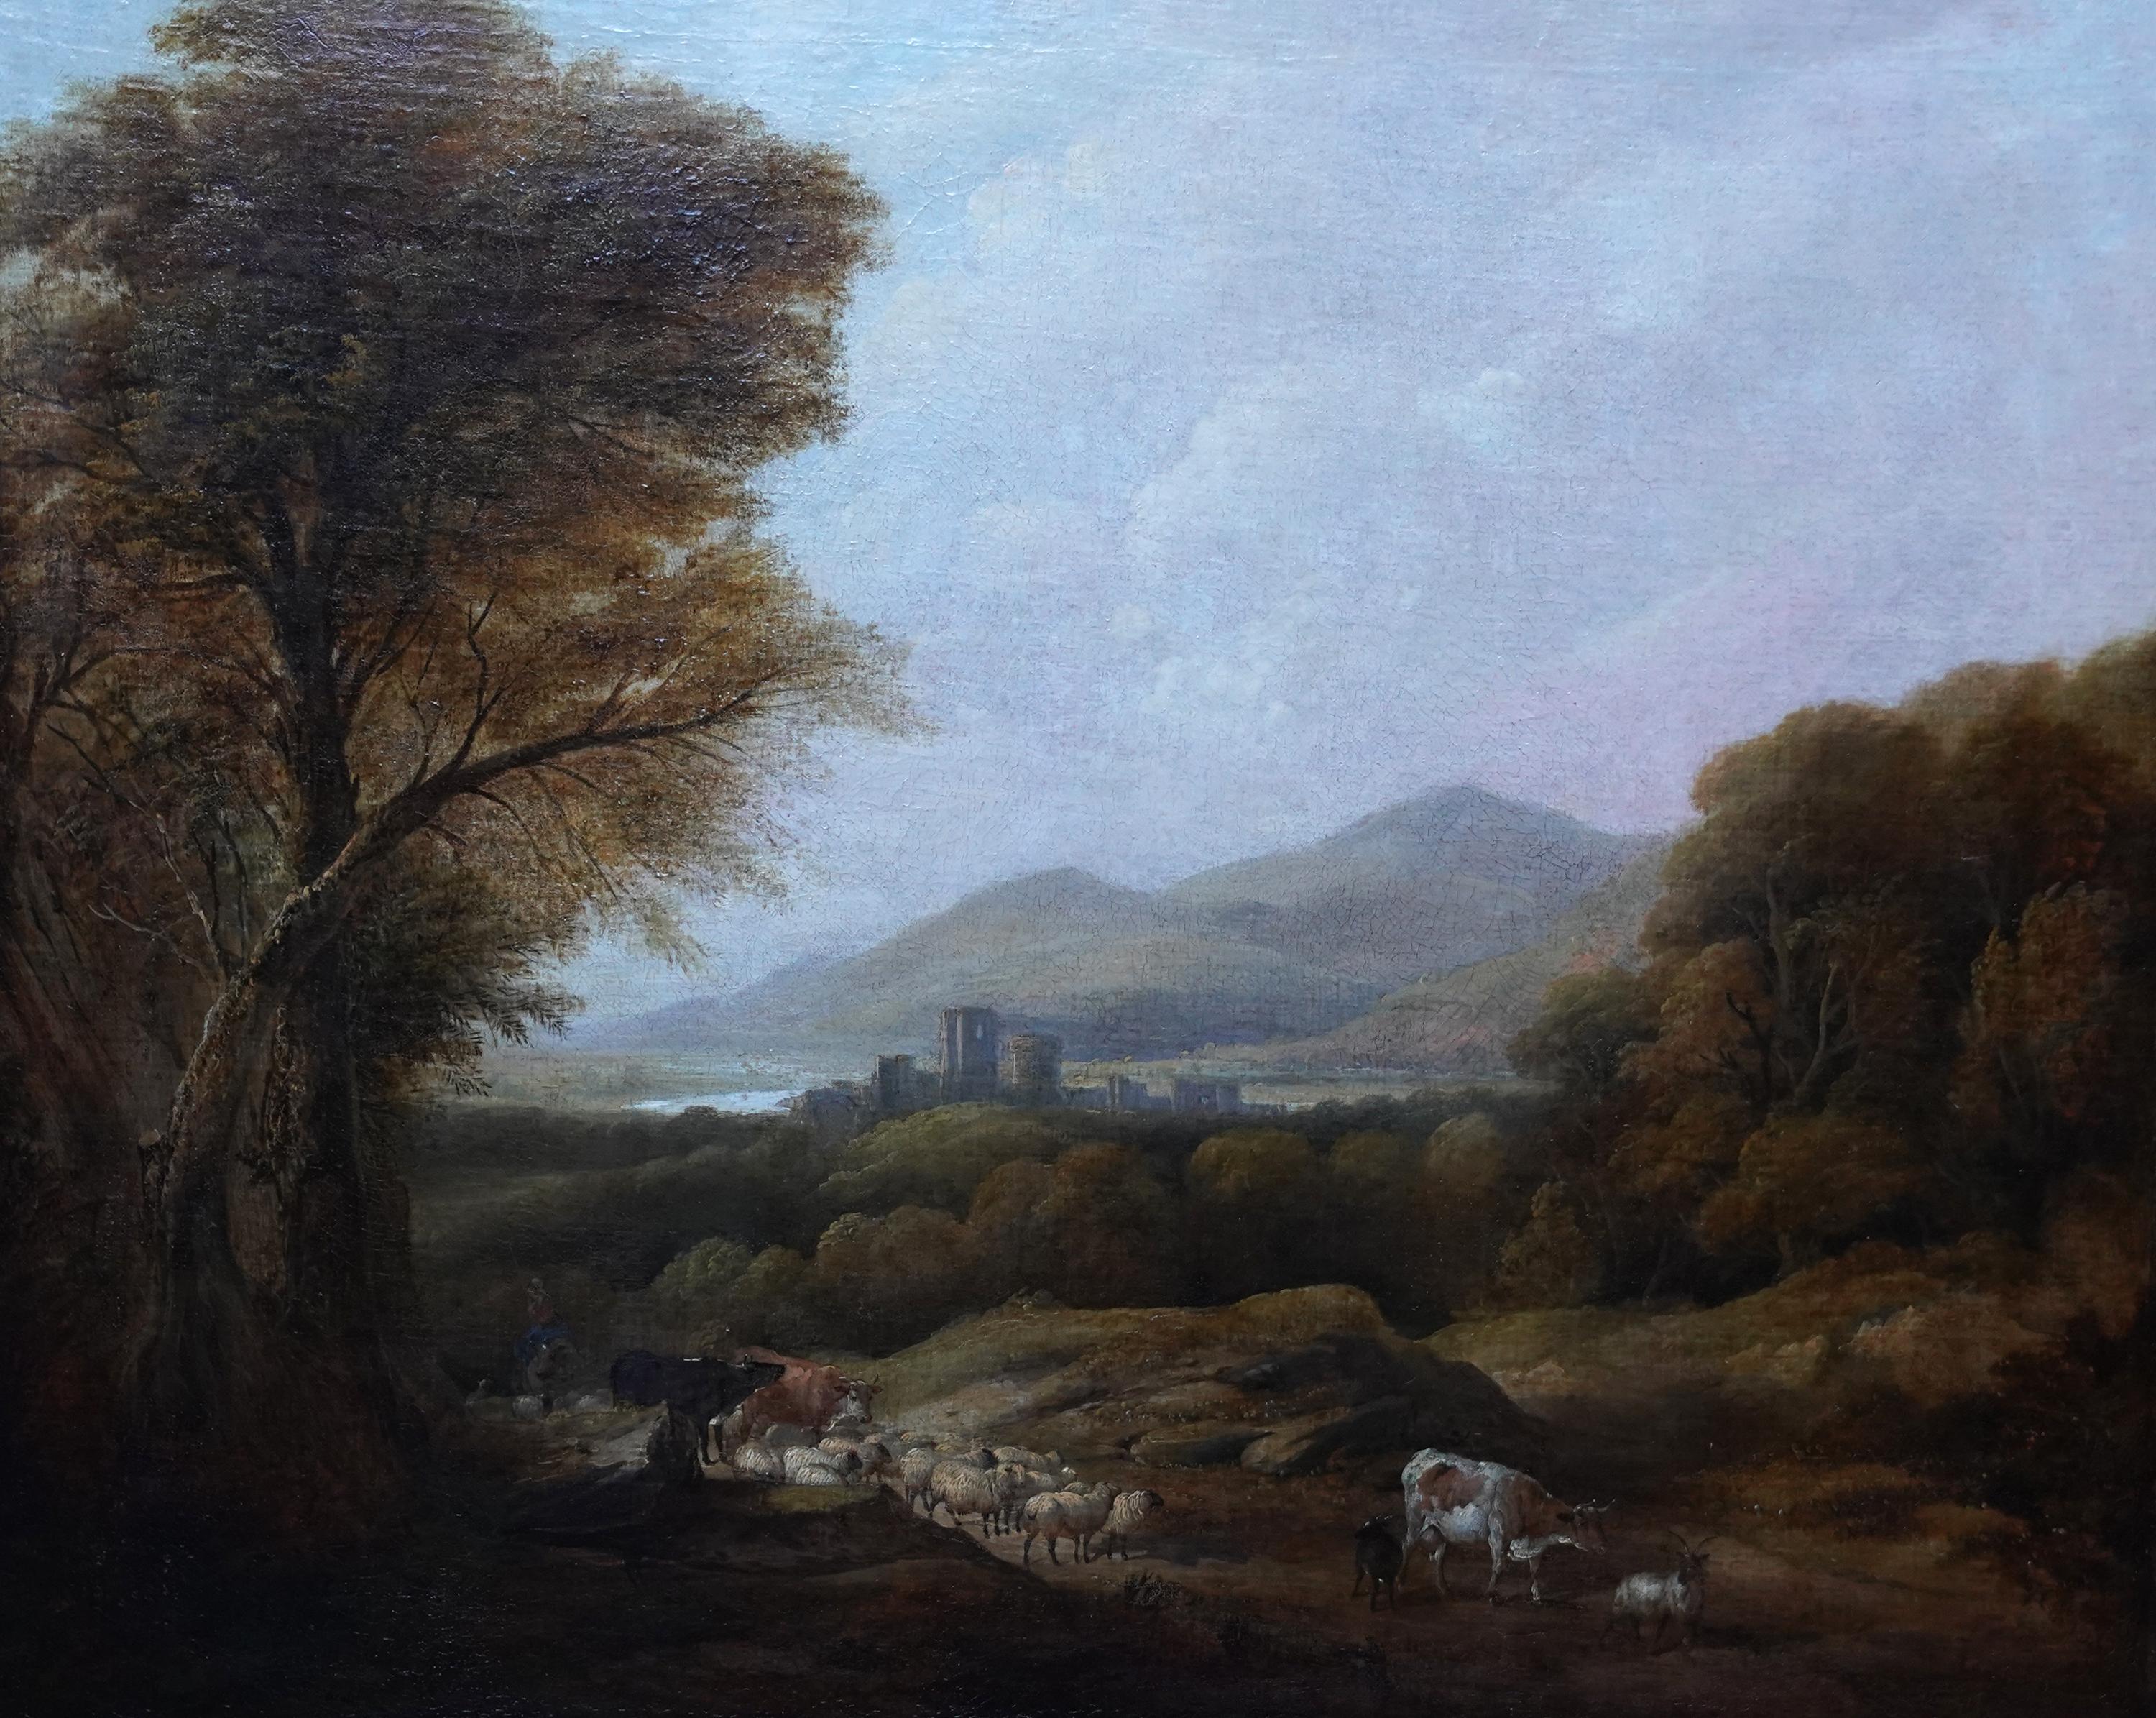 Cattle and Drover in a Landscape - British Victorian art landscape oil painting - Old Masters Painting by Henry Jutsum 